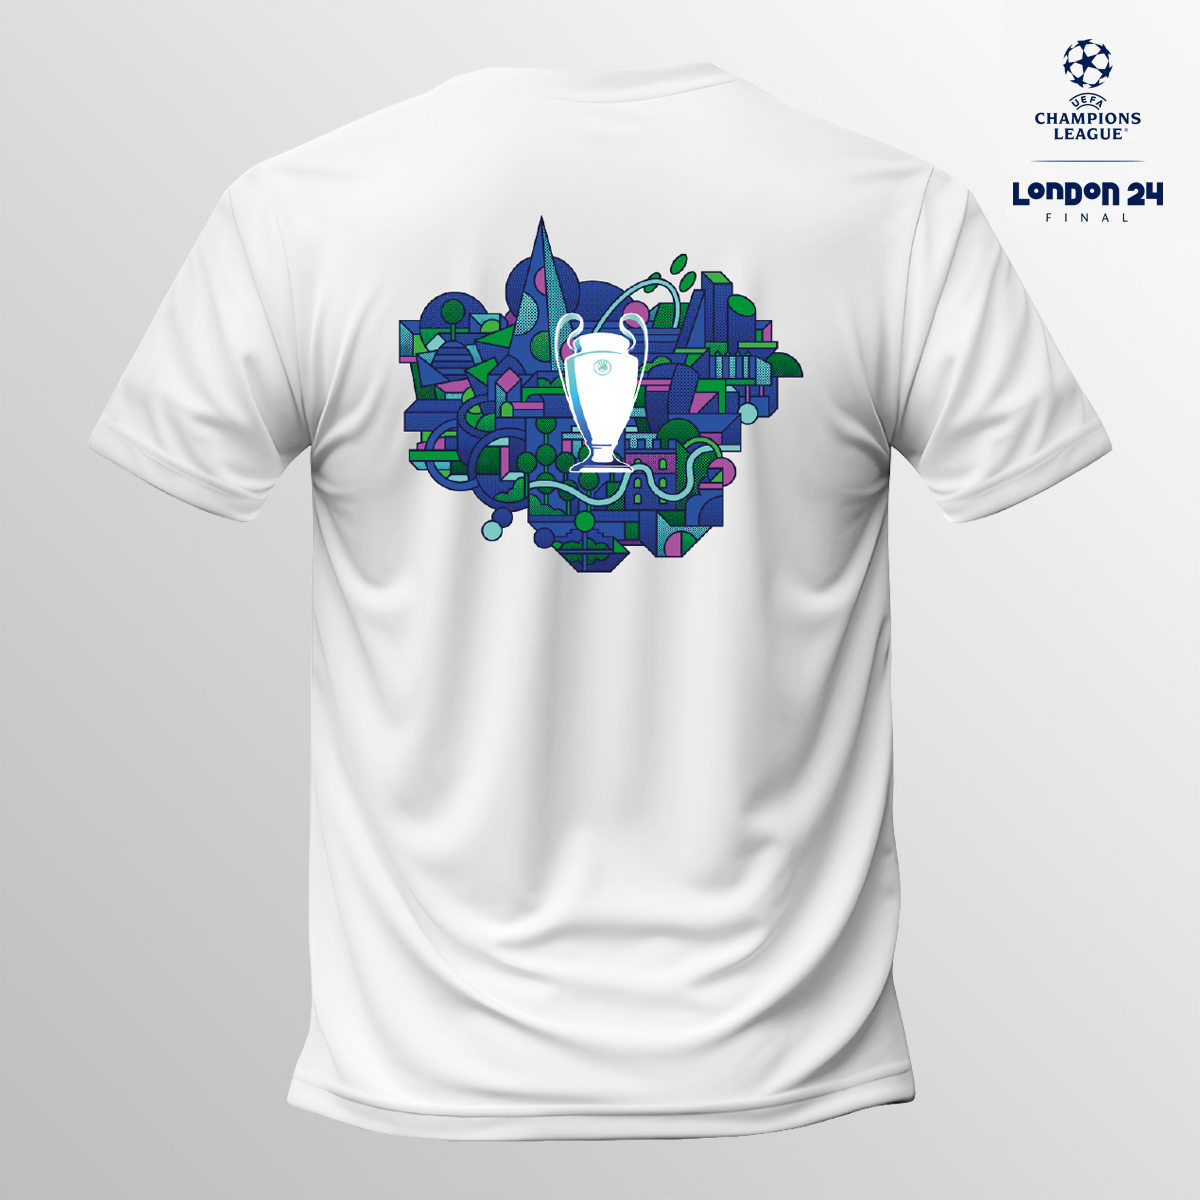 London 24 UCL Final Event T-shirt - White